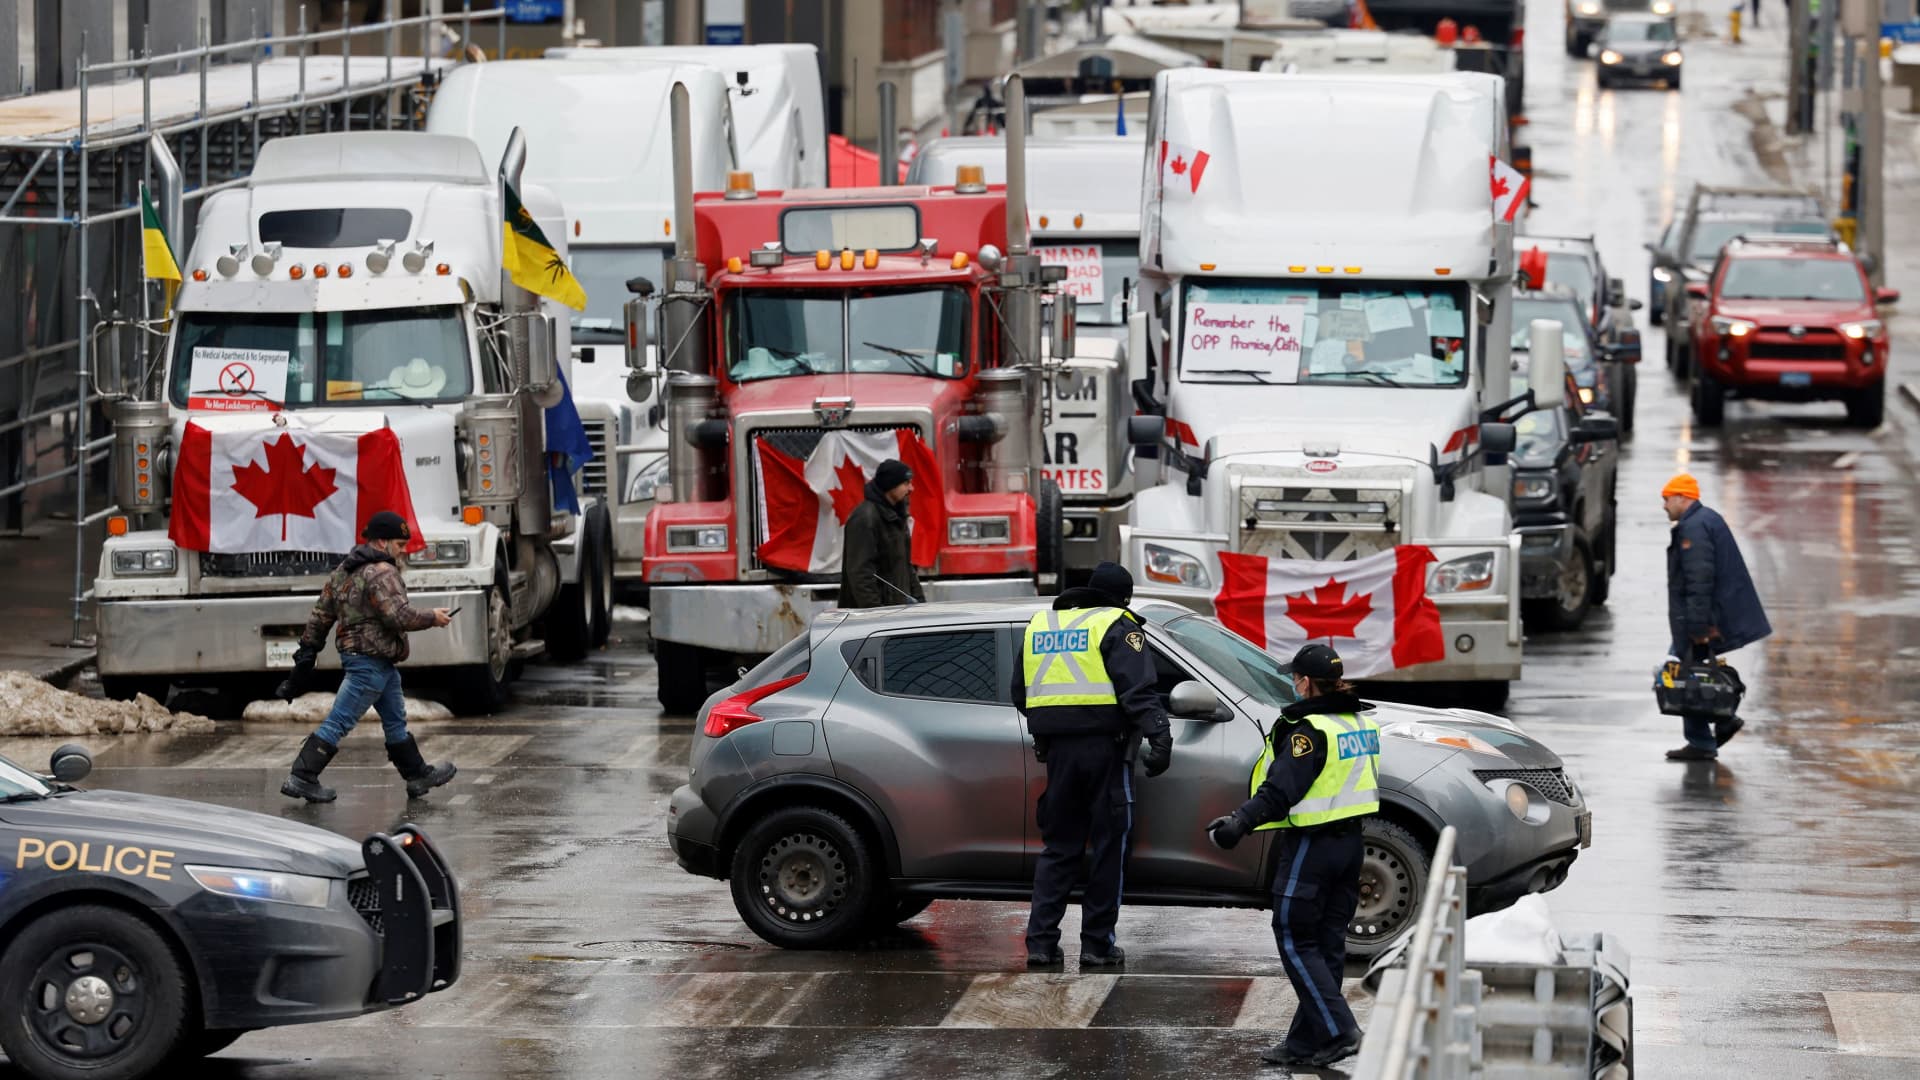 Vehicles clog downtown streets as truckers and supporters continue to protest coronavirus disease (COVID-19) vaccine mandates, in Ottawa, Ontario, Canada, February 10, 2022.